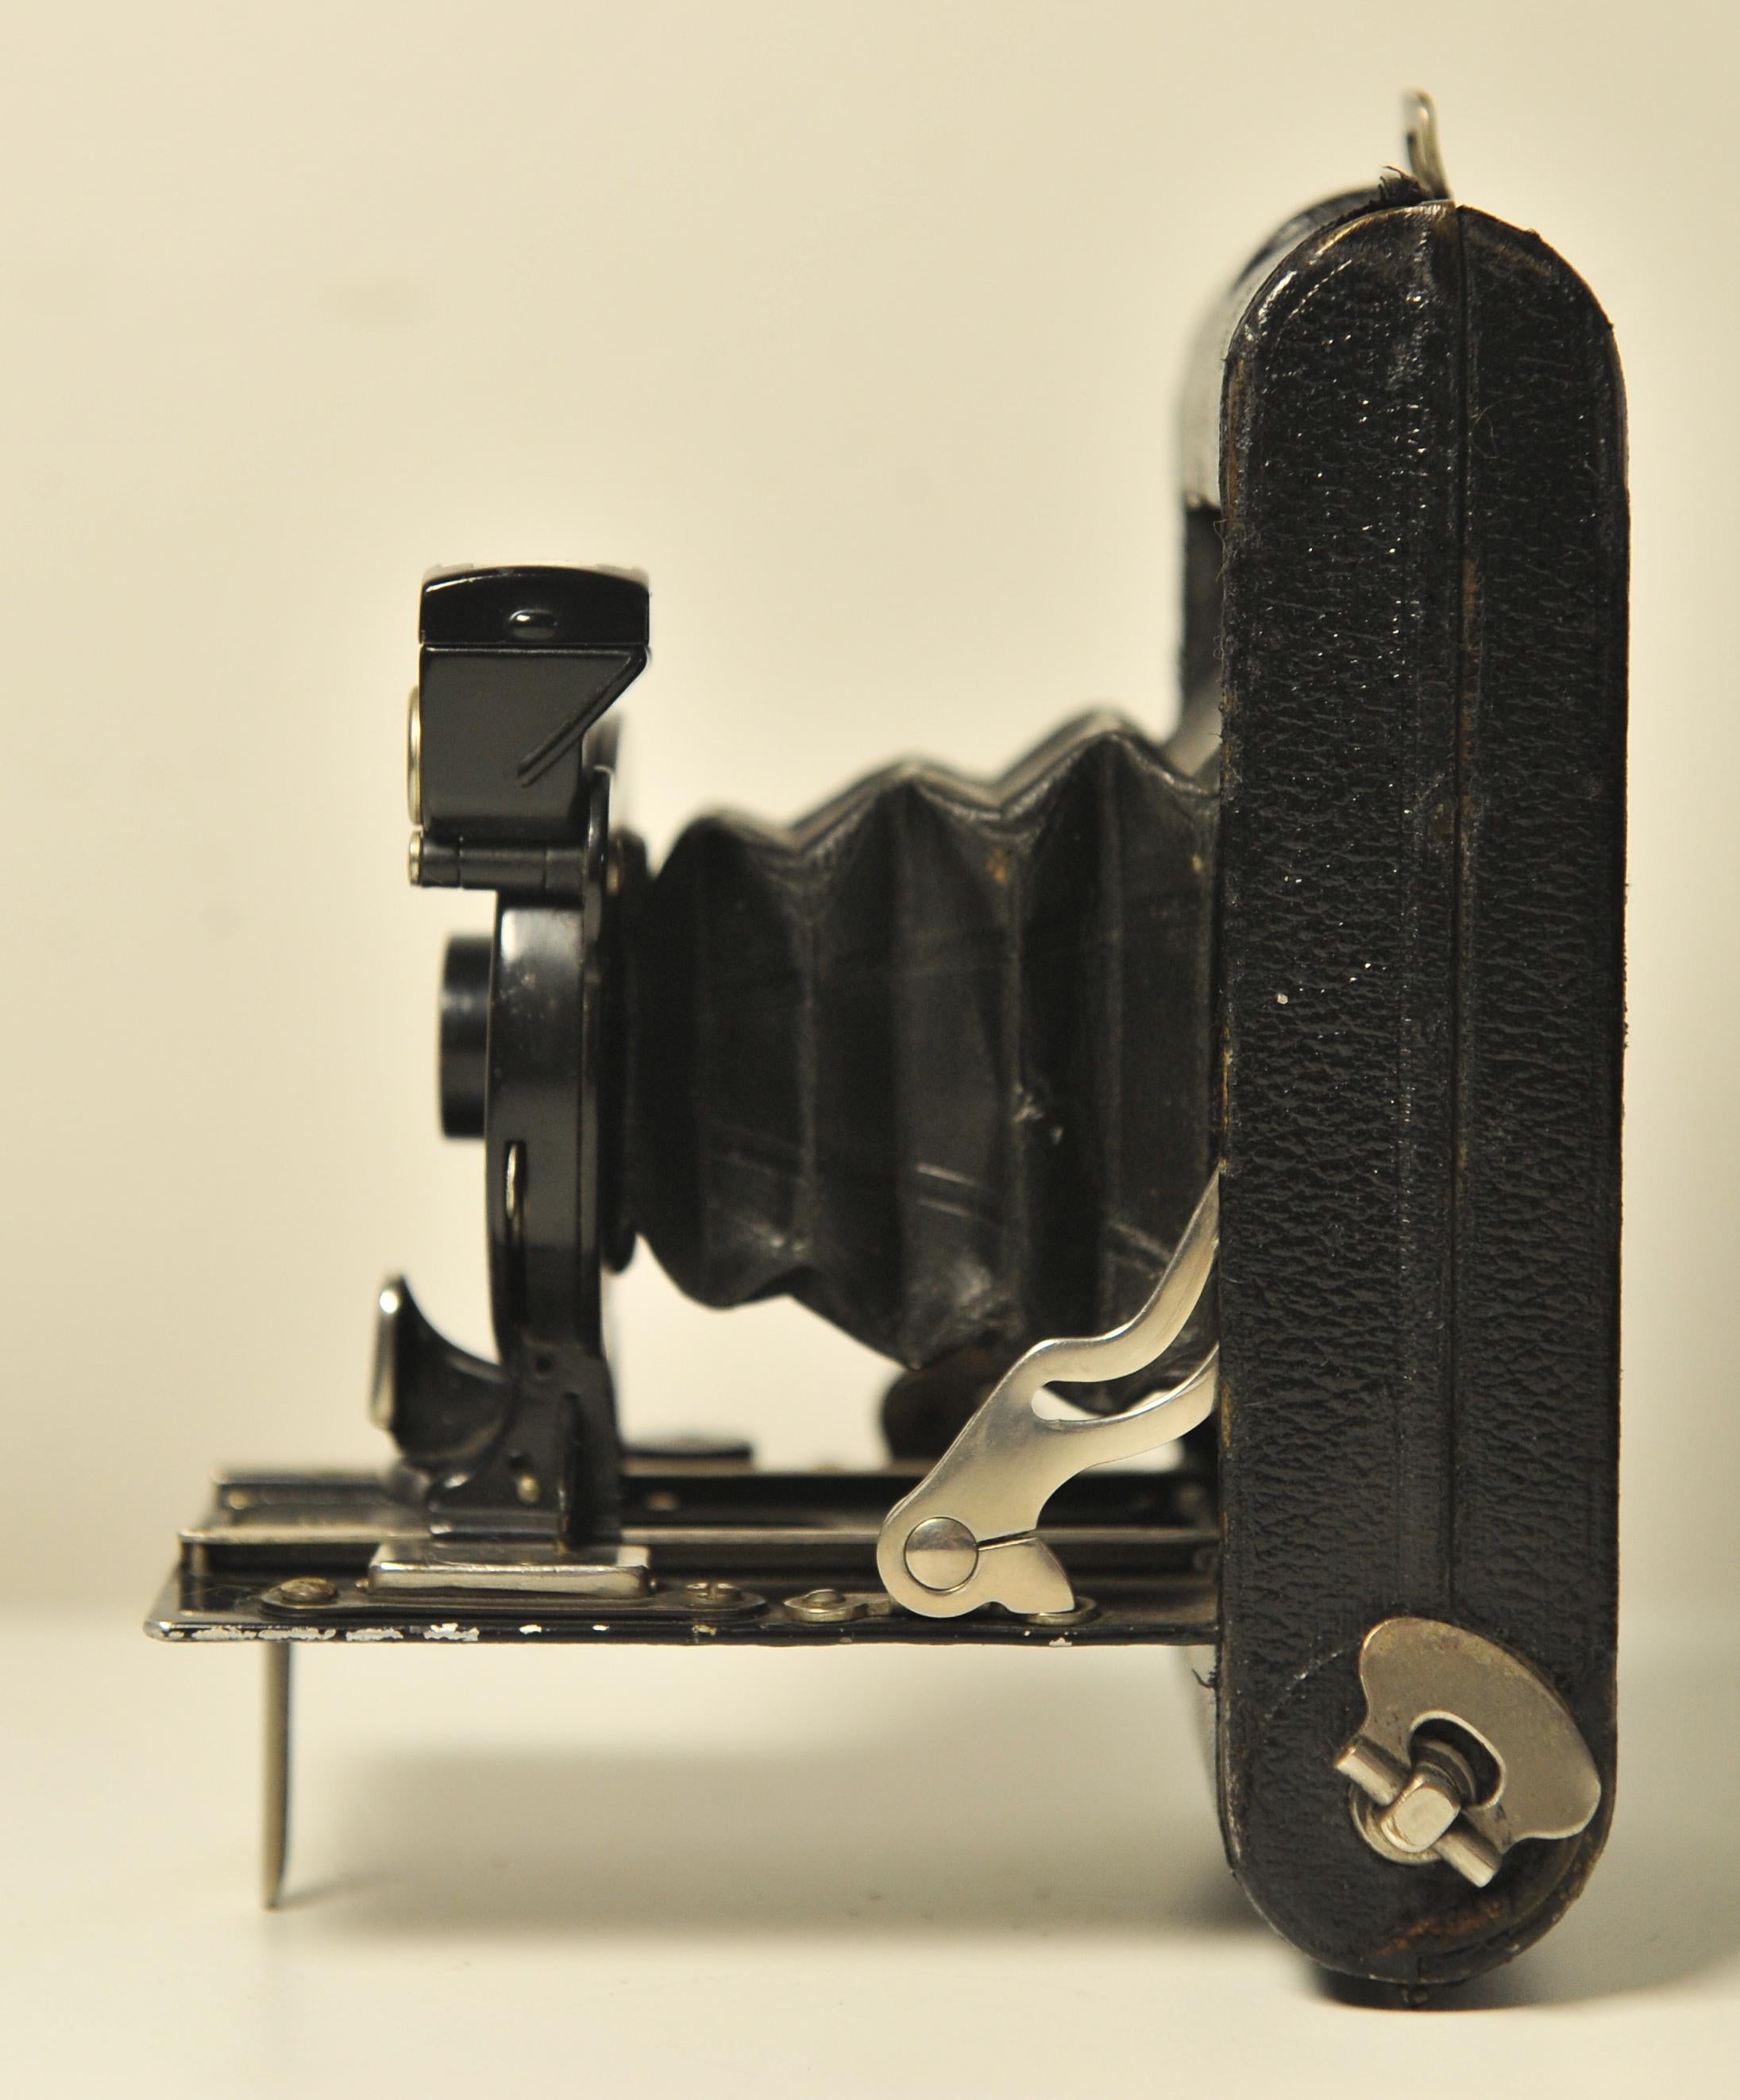 Ernemann ROLF II Folding 127 Rollfilm Camera 75mm F12 Rapid Rectilinear Fixed Lens of Dresden, Germany

Manufactured by Ernemann between 1924-1926.

Folded dimensions: 67 mm x 125 mm x 27 mm

Lens: f12, 75 mm , apertures of f12 and f18 on